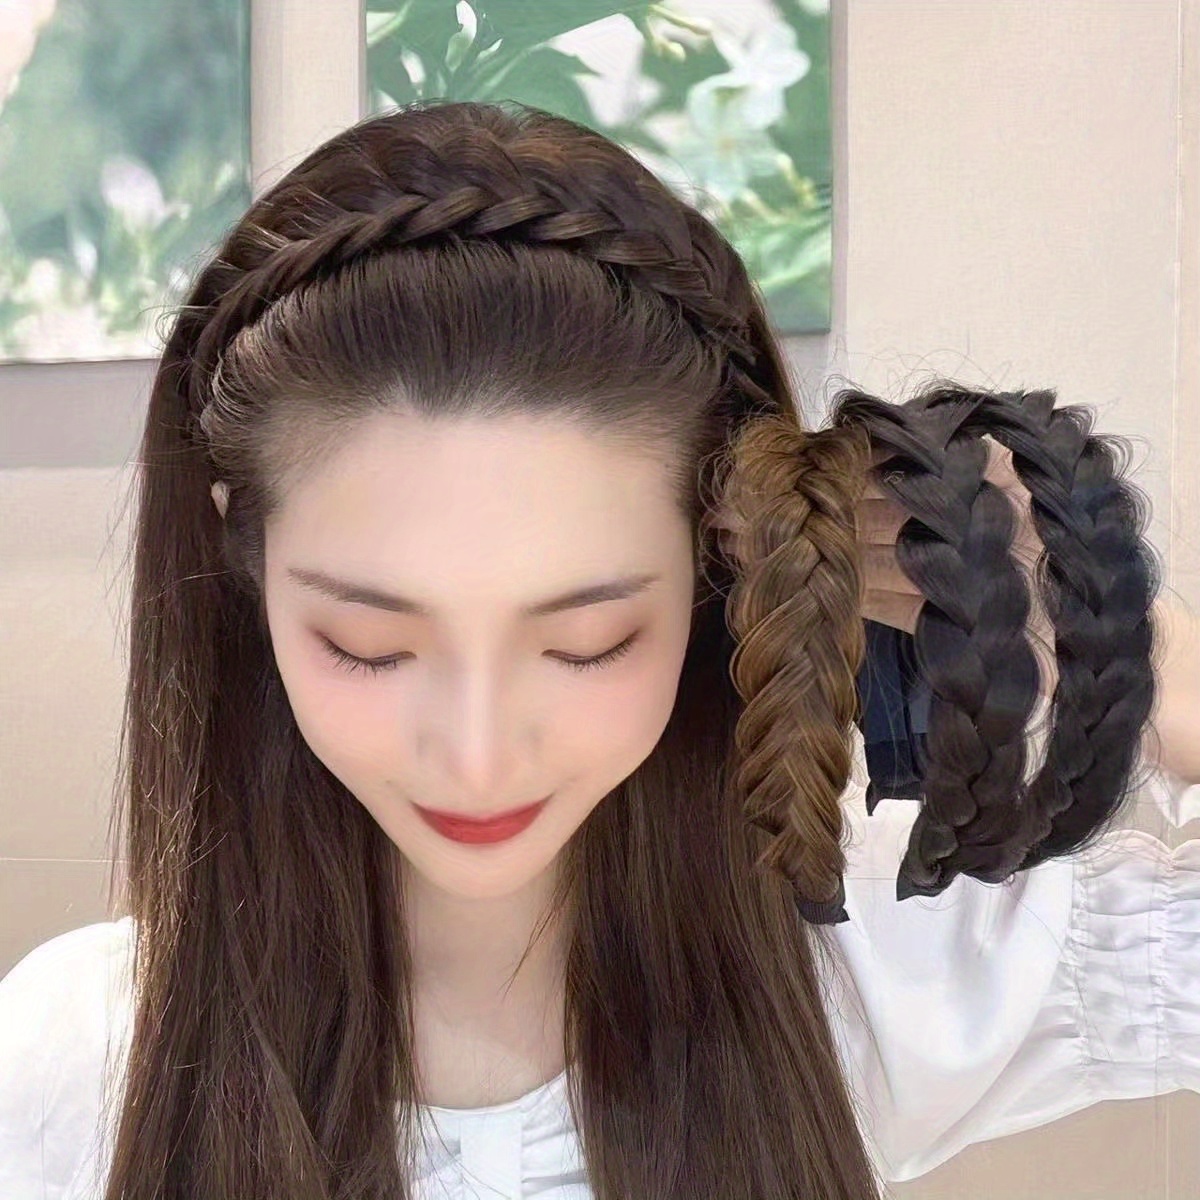  Korean Style Wig Braid Headband, Wig Hair Band, 5 Strands Wide  Synthetic Hair Braided Headband, Wig Hair Bands for Women'S Hair Non Slip  (Black with Combs) : Beauty & Personal Care